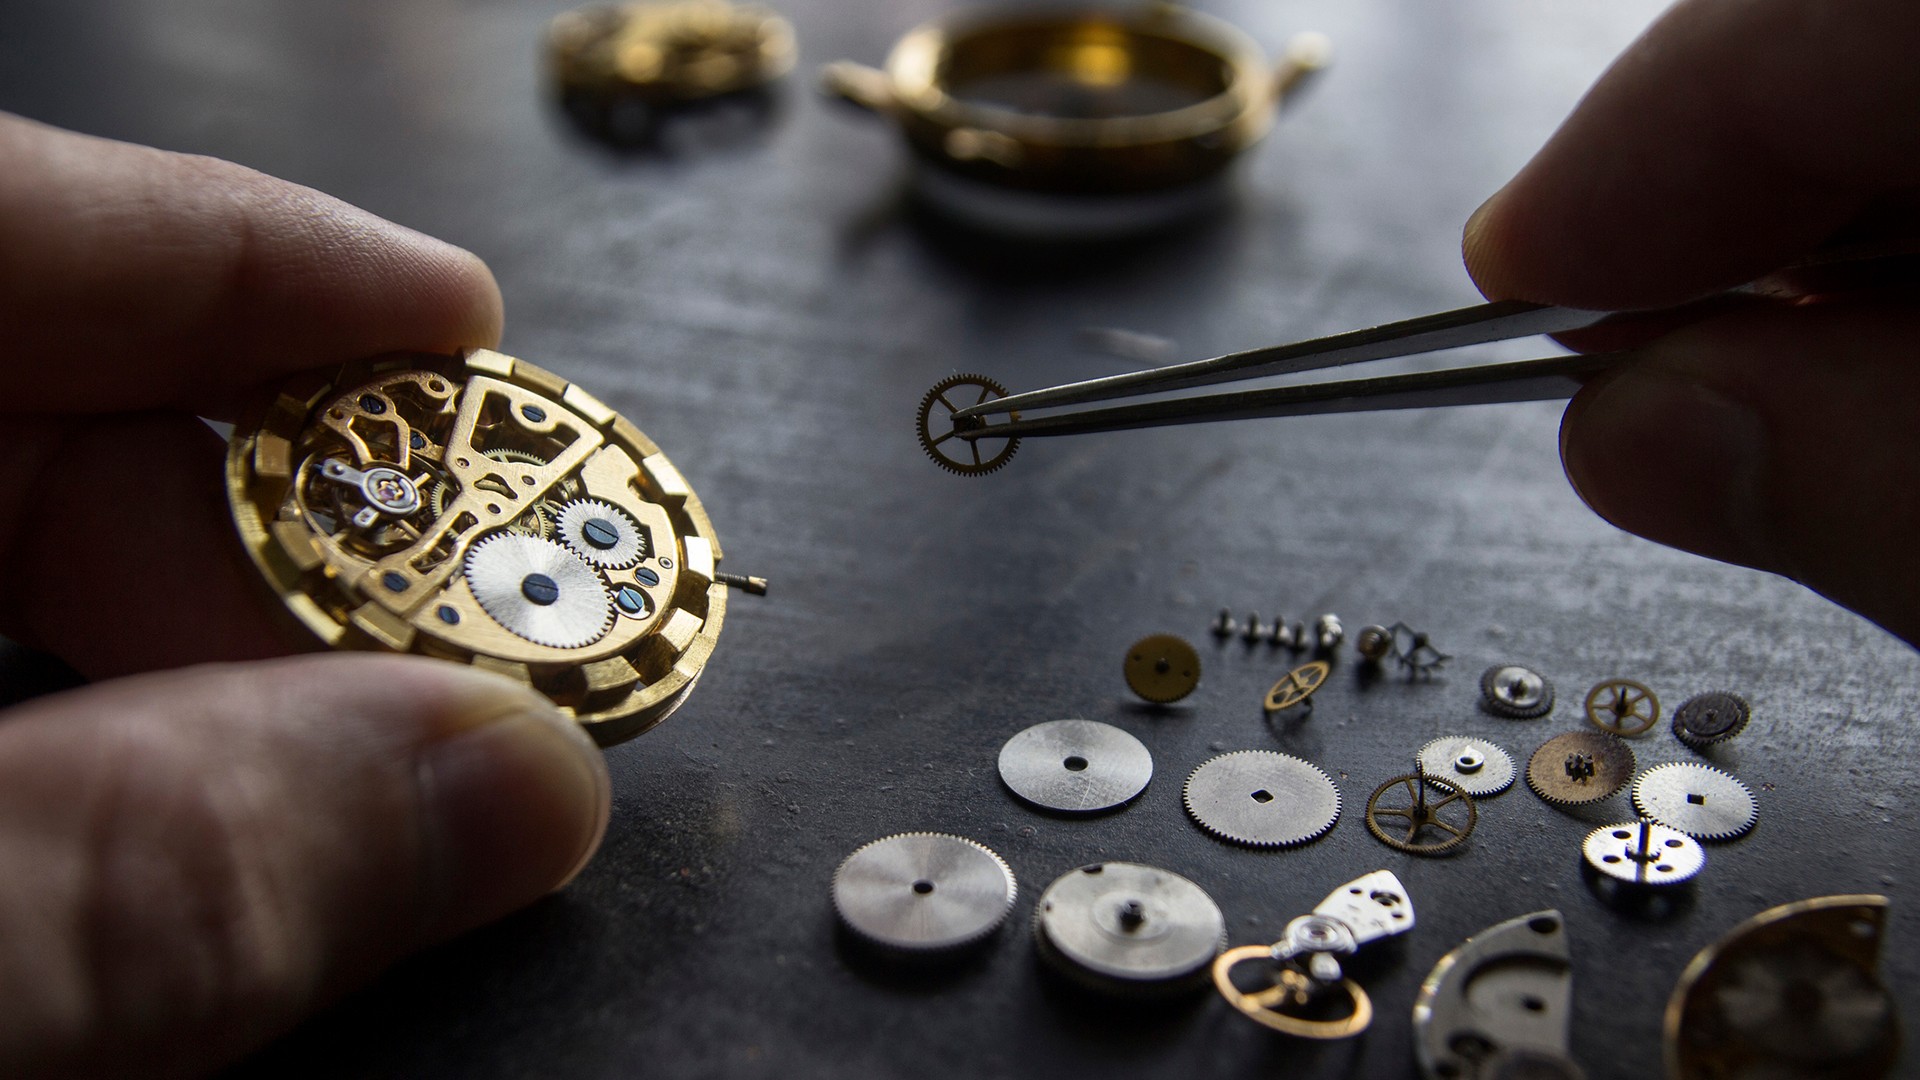 A watchmaker puts a watch together.